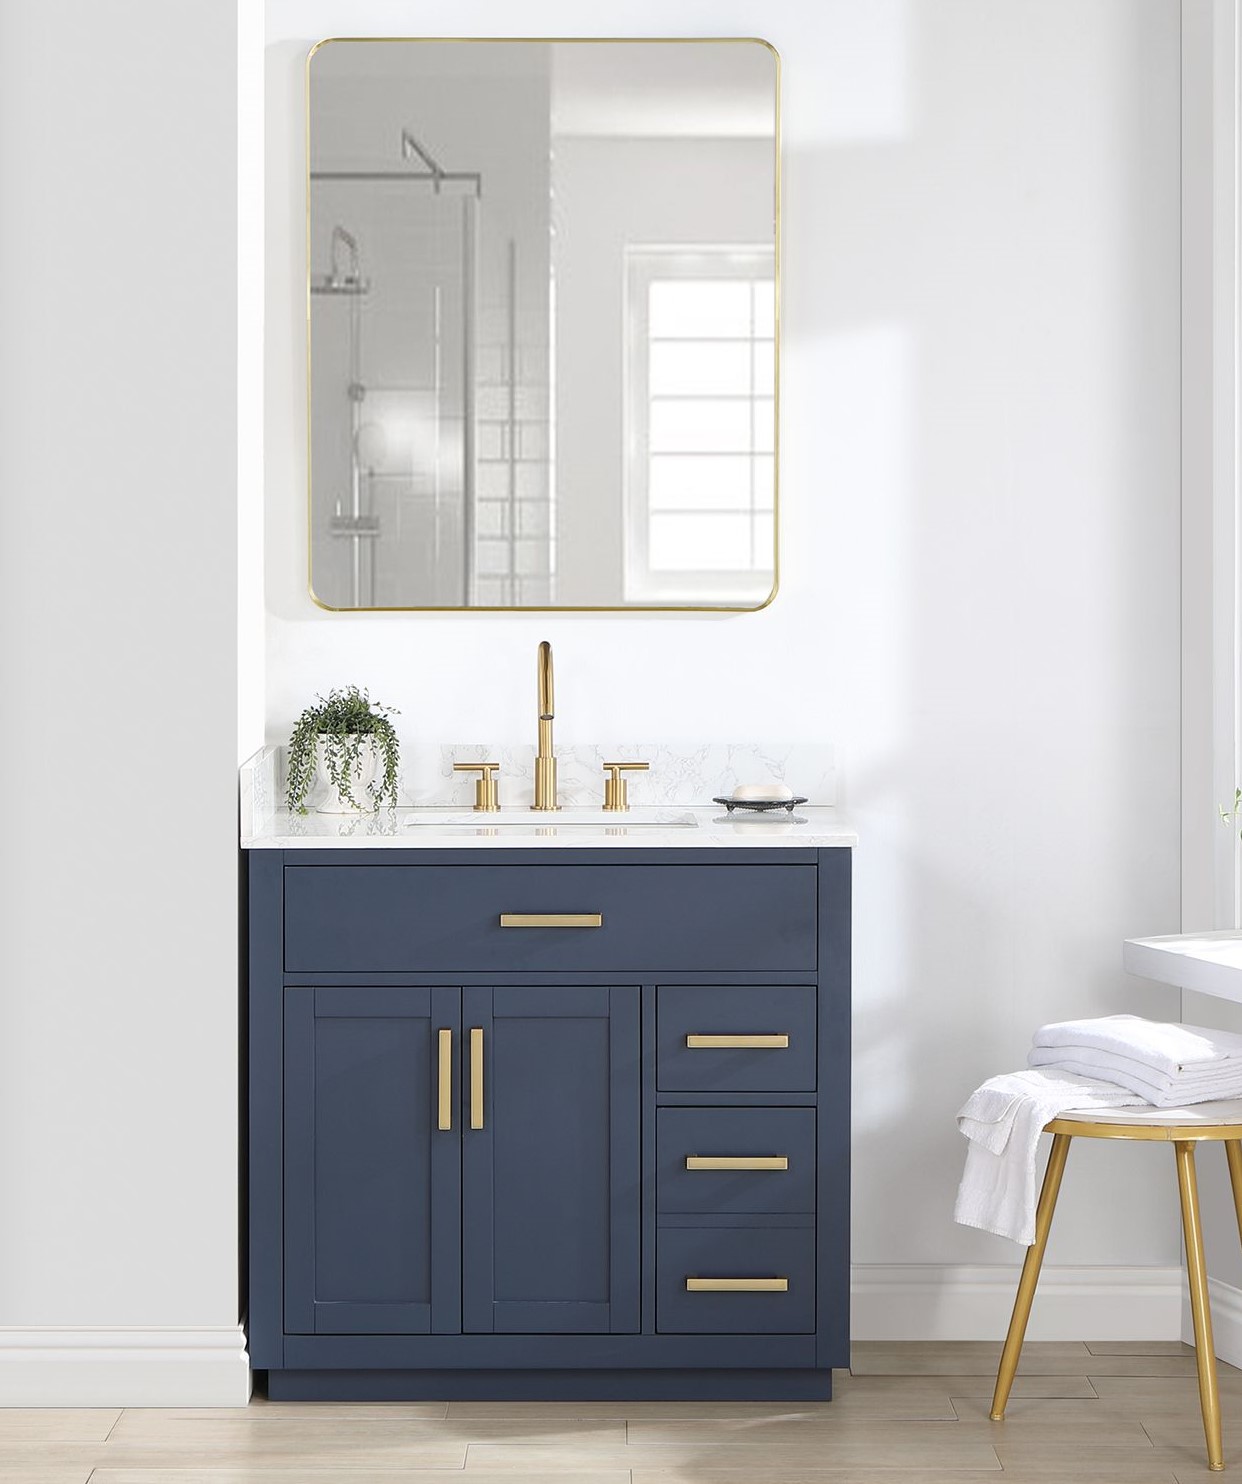 Issac Edwards 36" Single Bathroom Vanity in Royal Blue with Grain White Composite Stone Countertop with Mirror